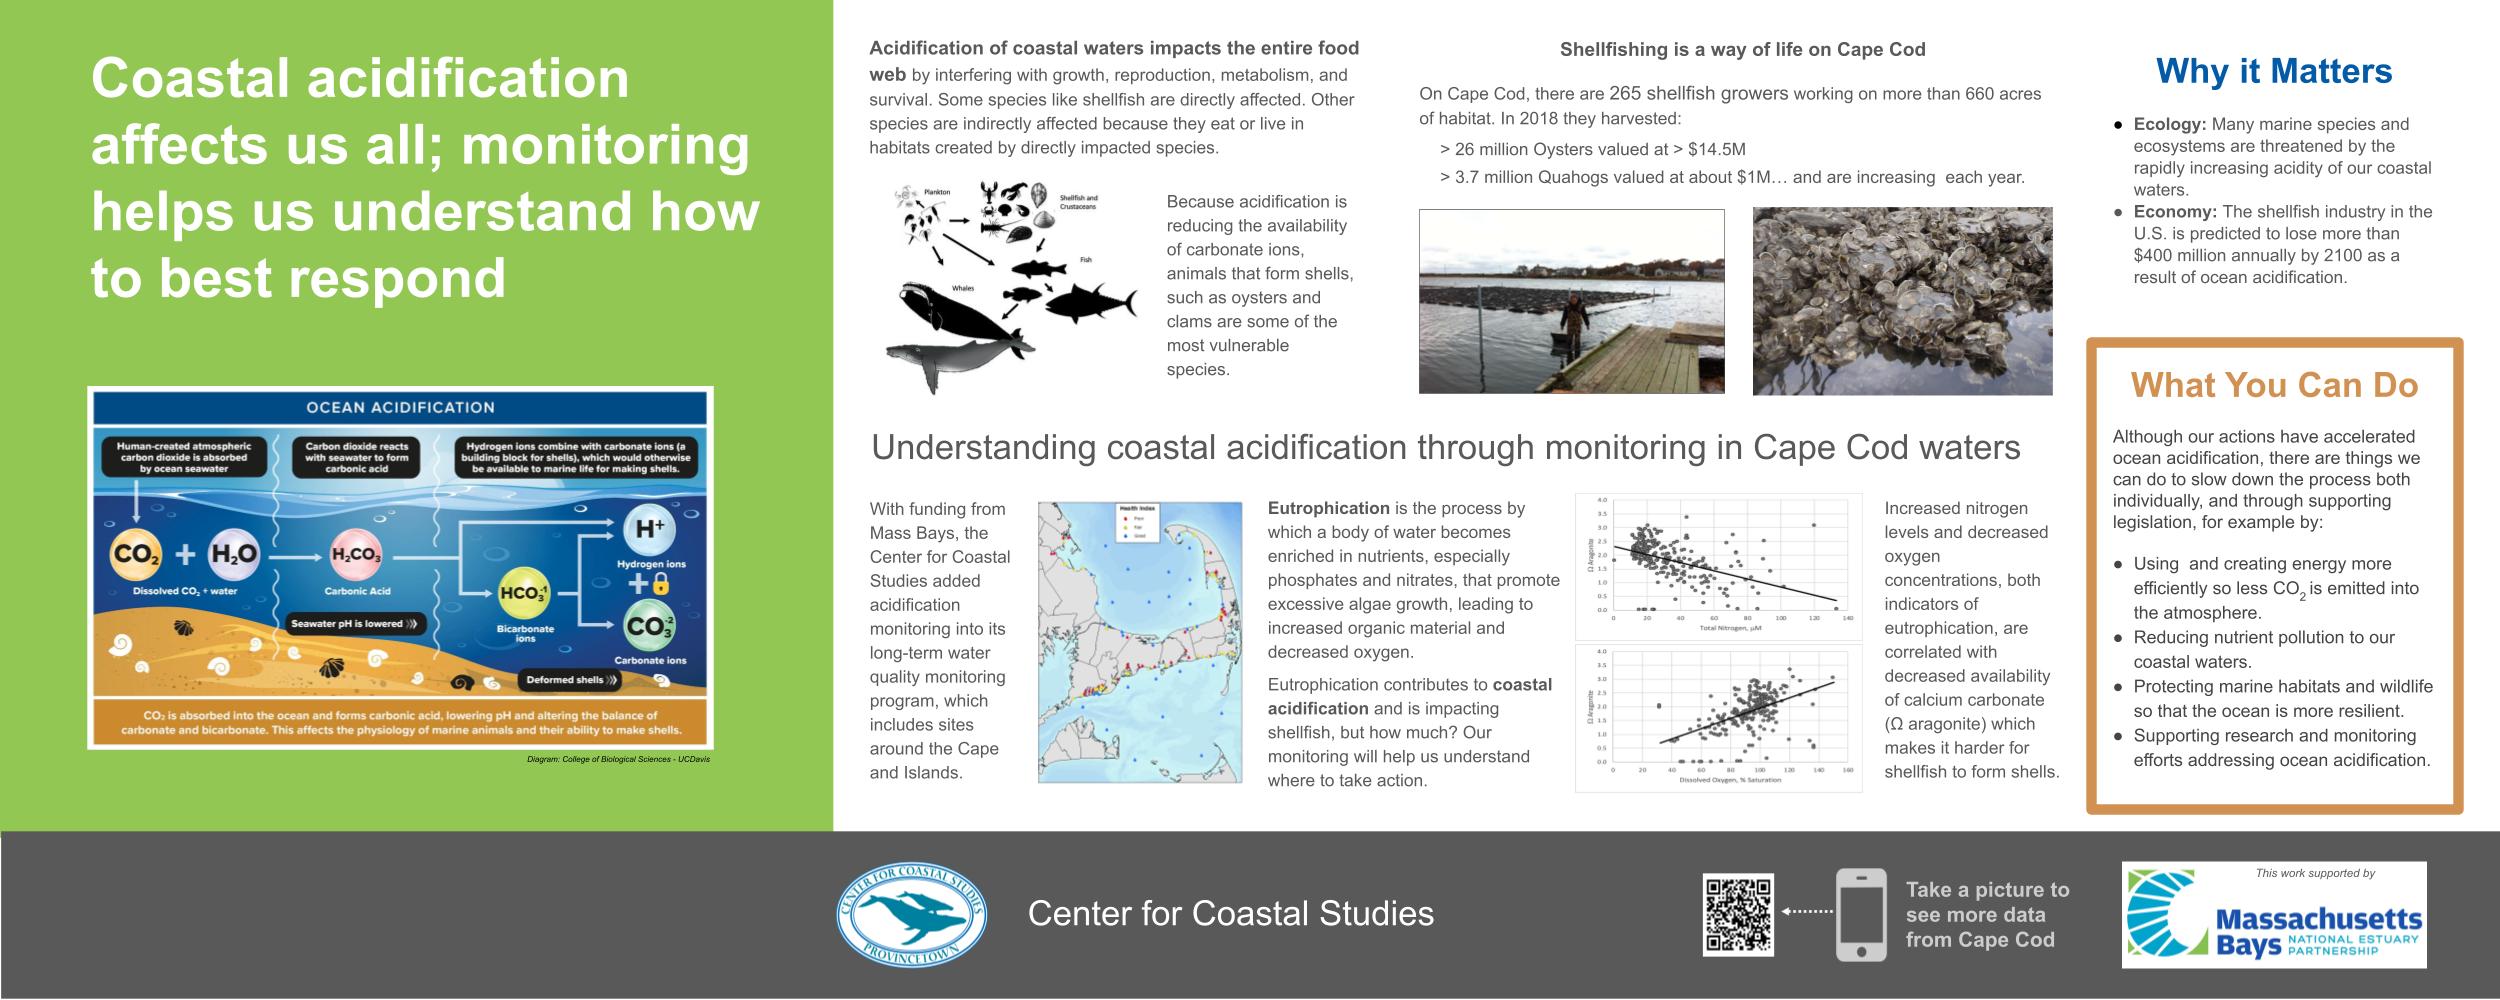 Poster describes the program in Cape Cod Bay to monitor acidification and help aquaculture.